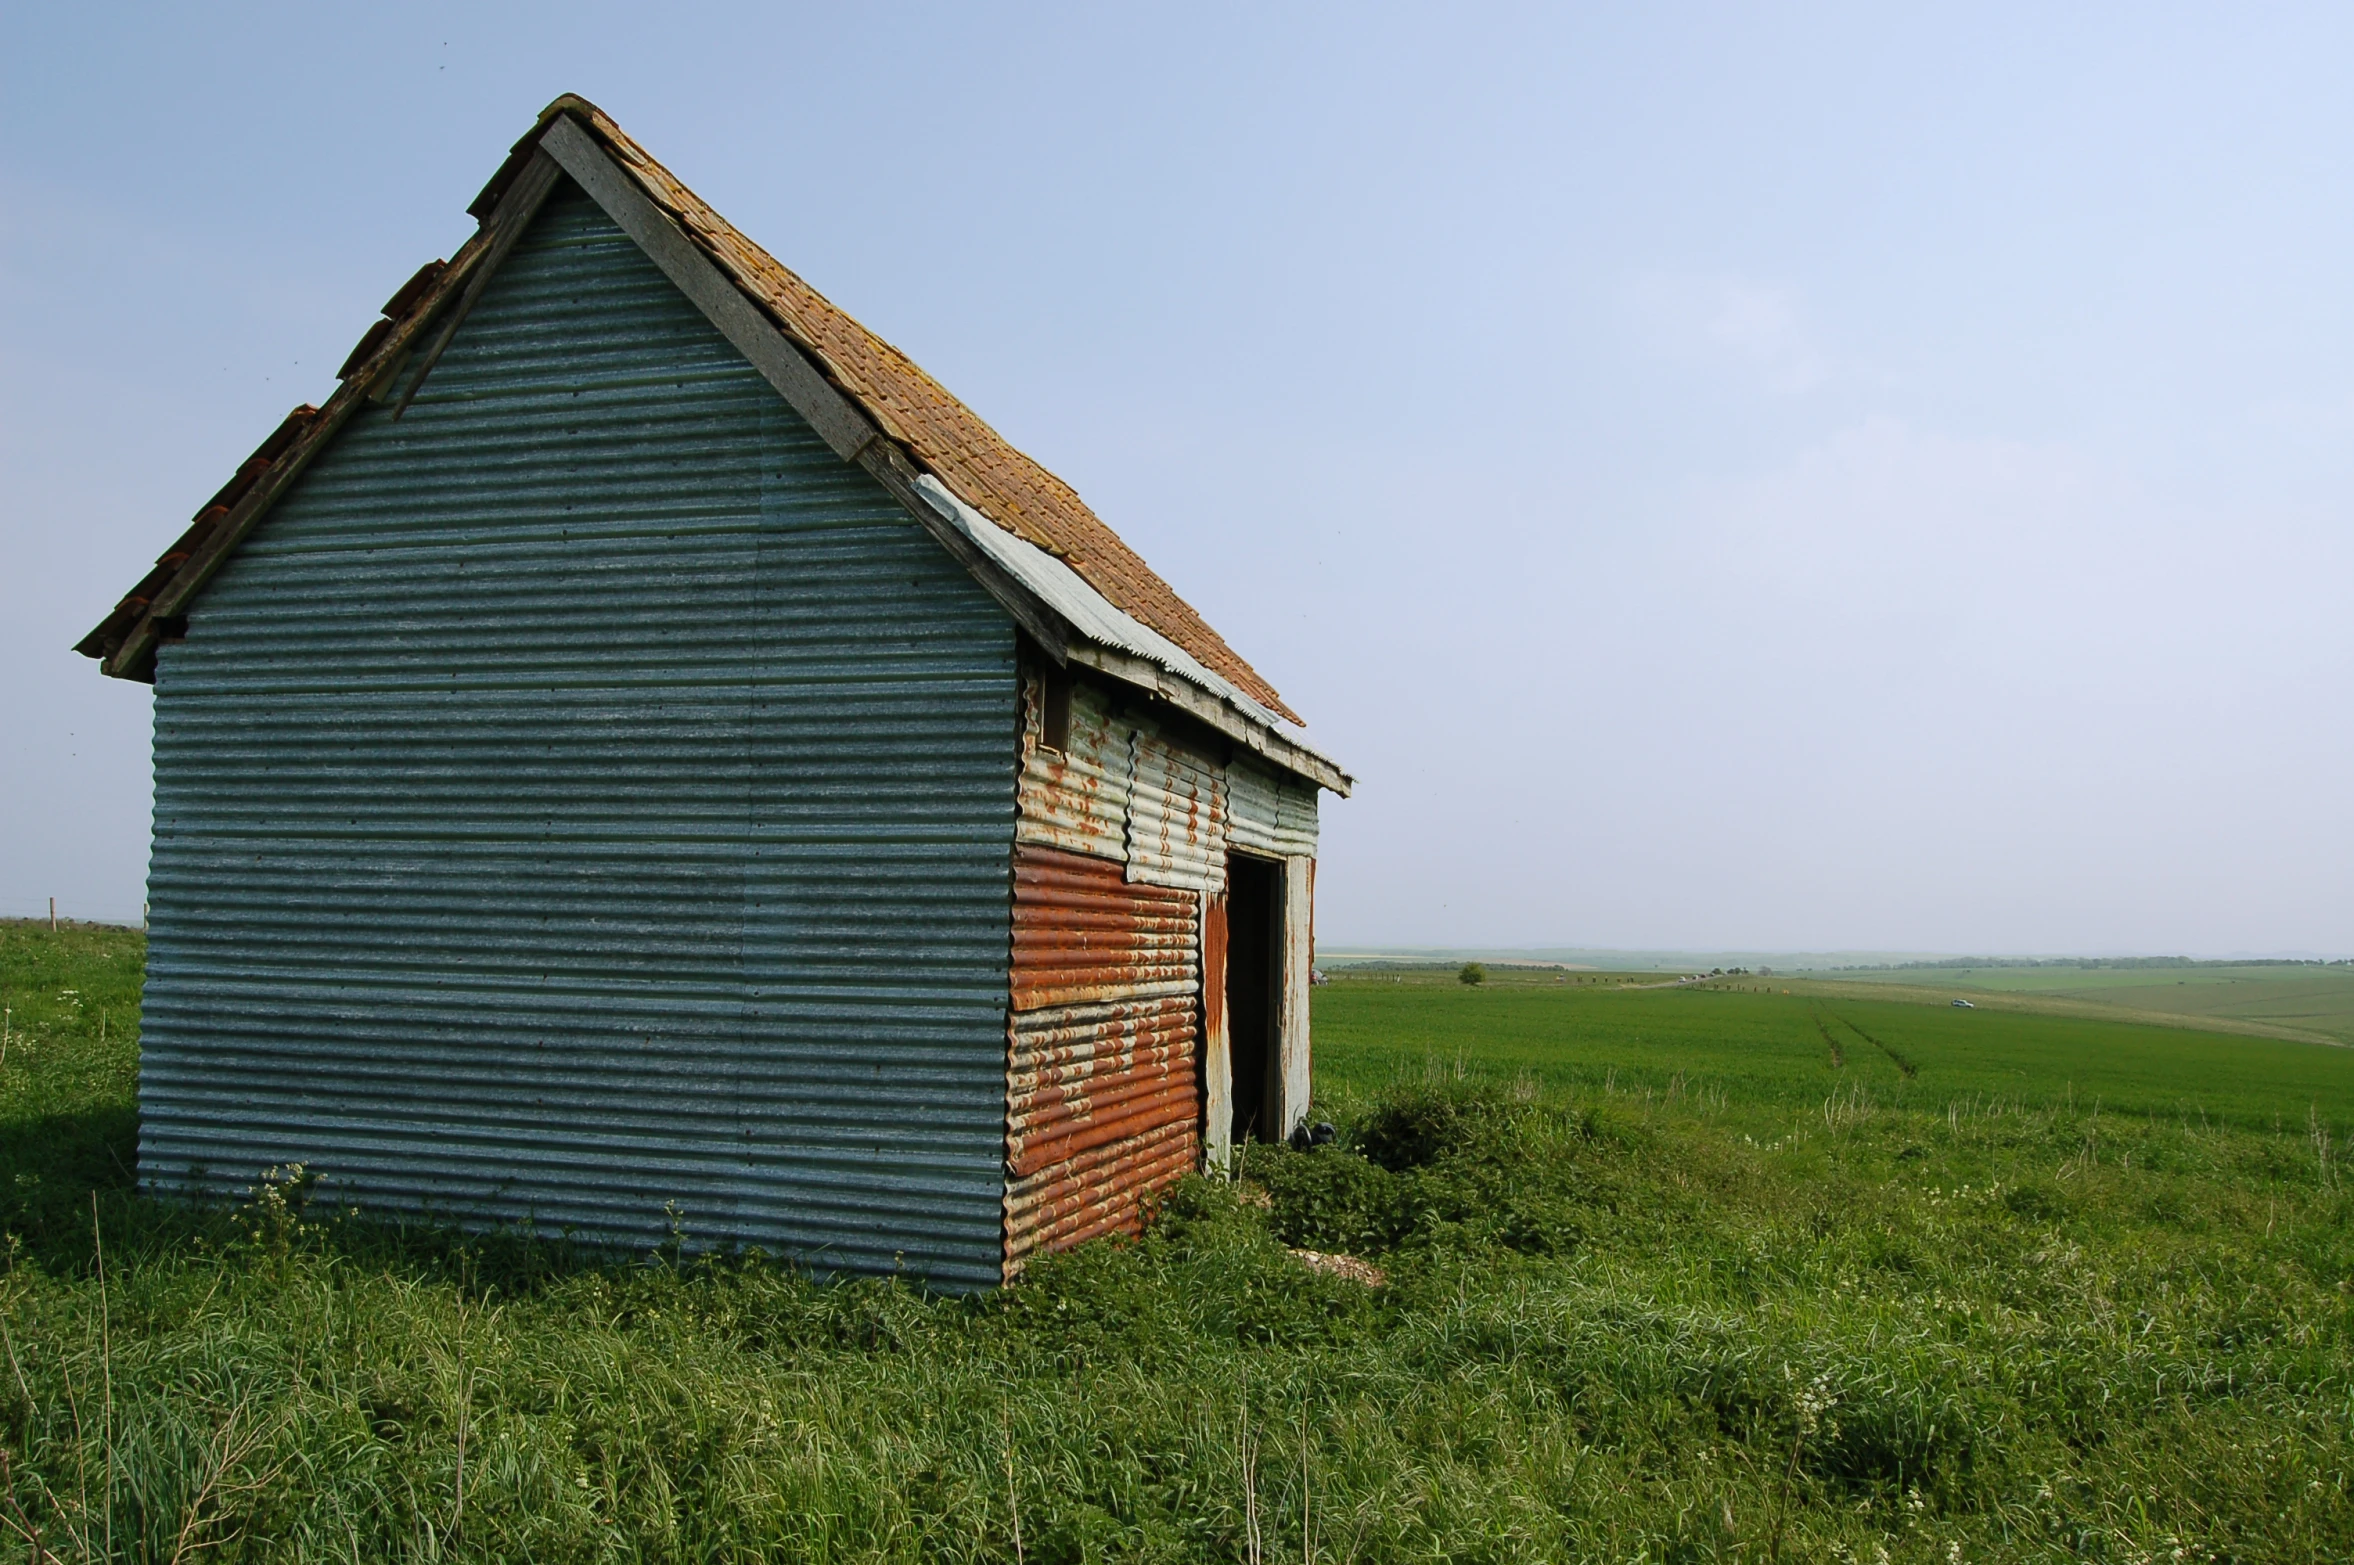 an old, worn down shed sits in a field